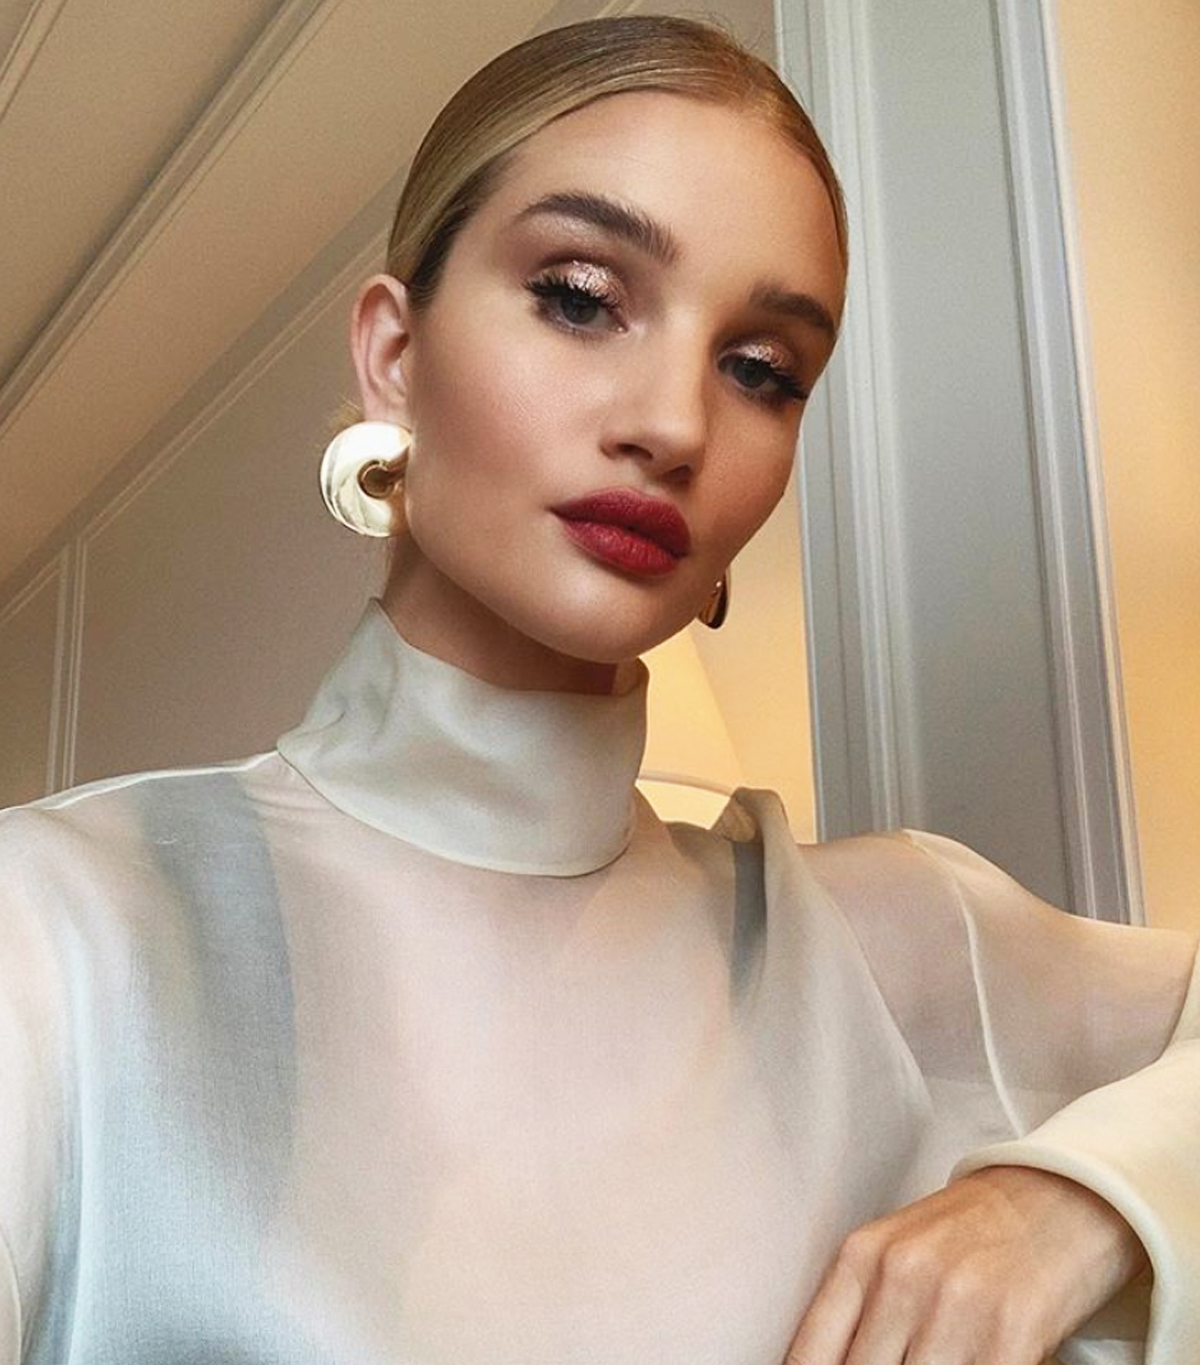 How to dress up an outfit: Rosie Huntington Whiteley with gold earrings